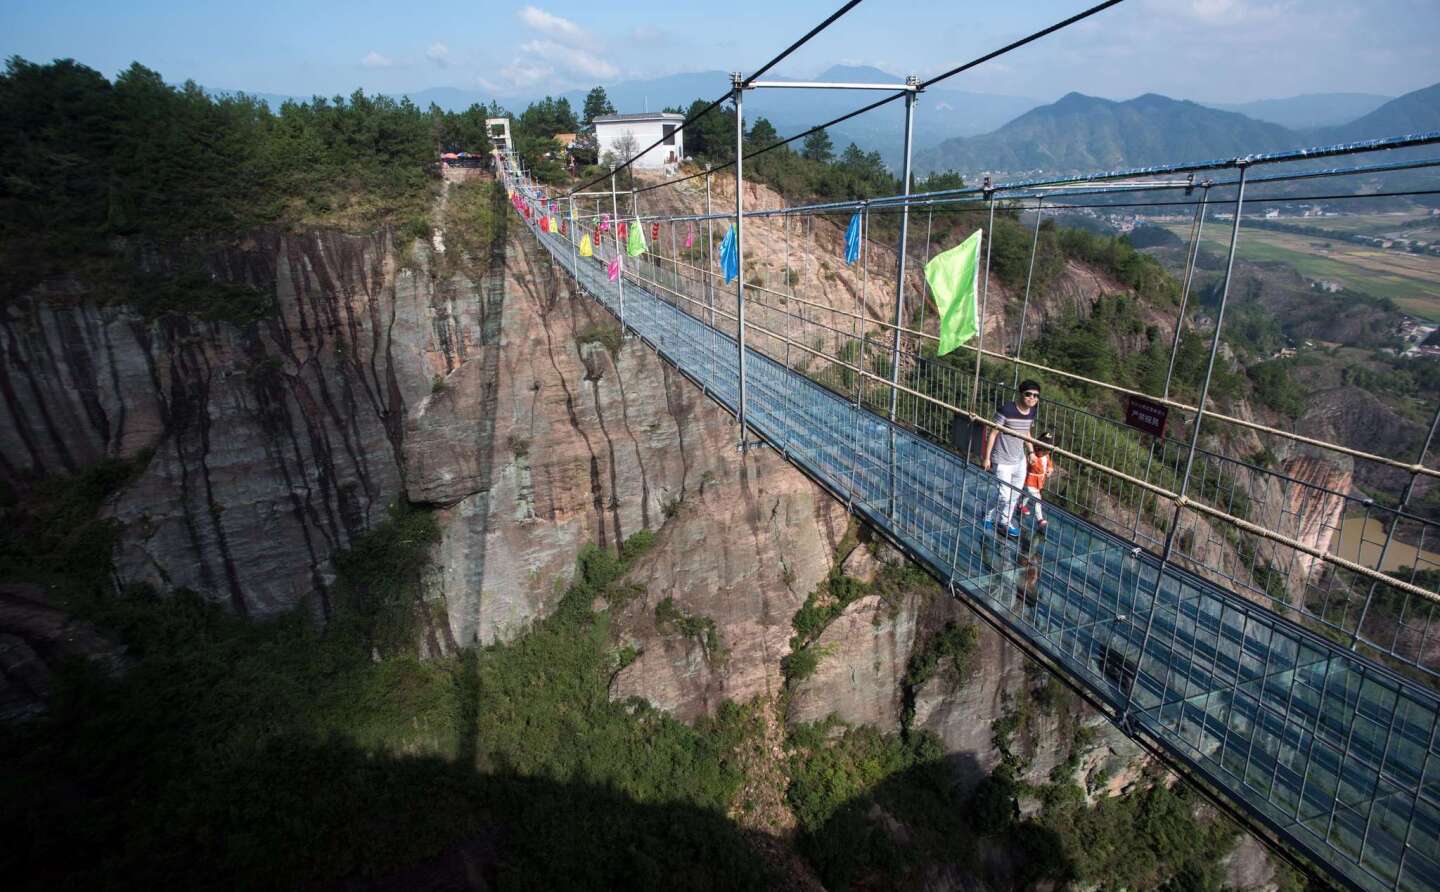 Glass walkway over canyon in China